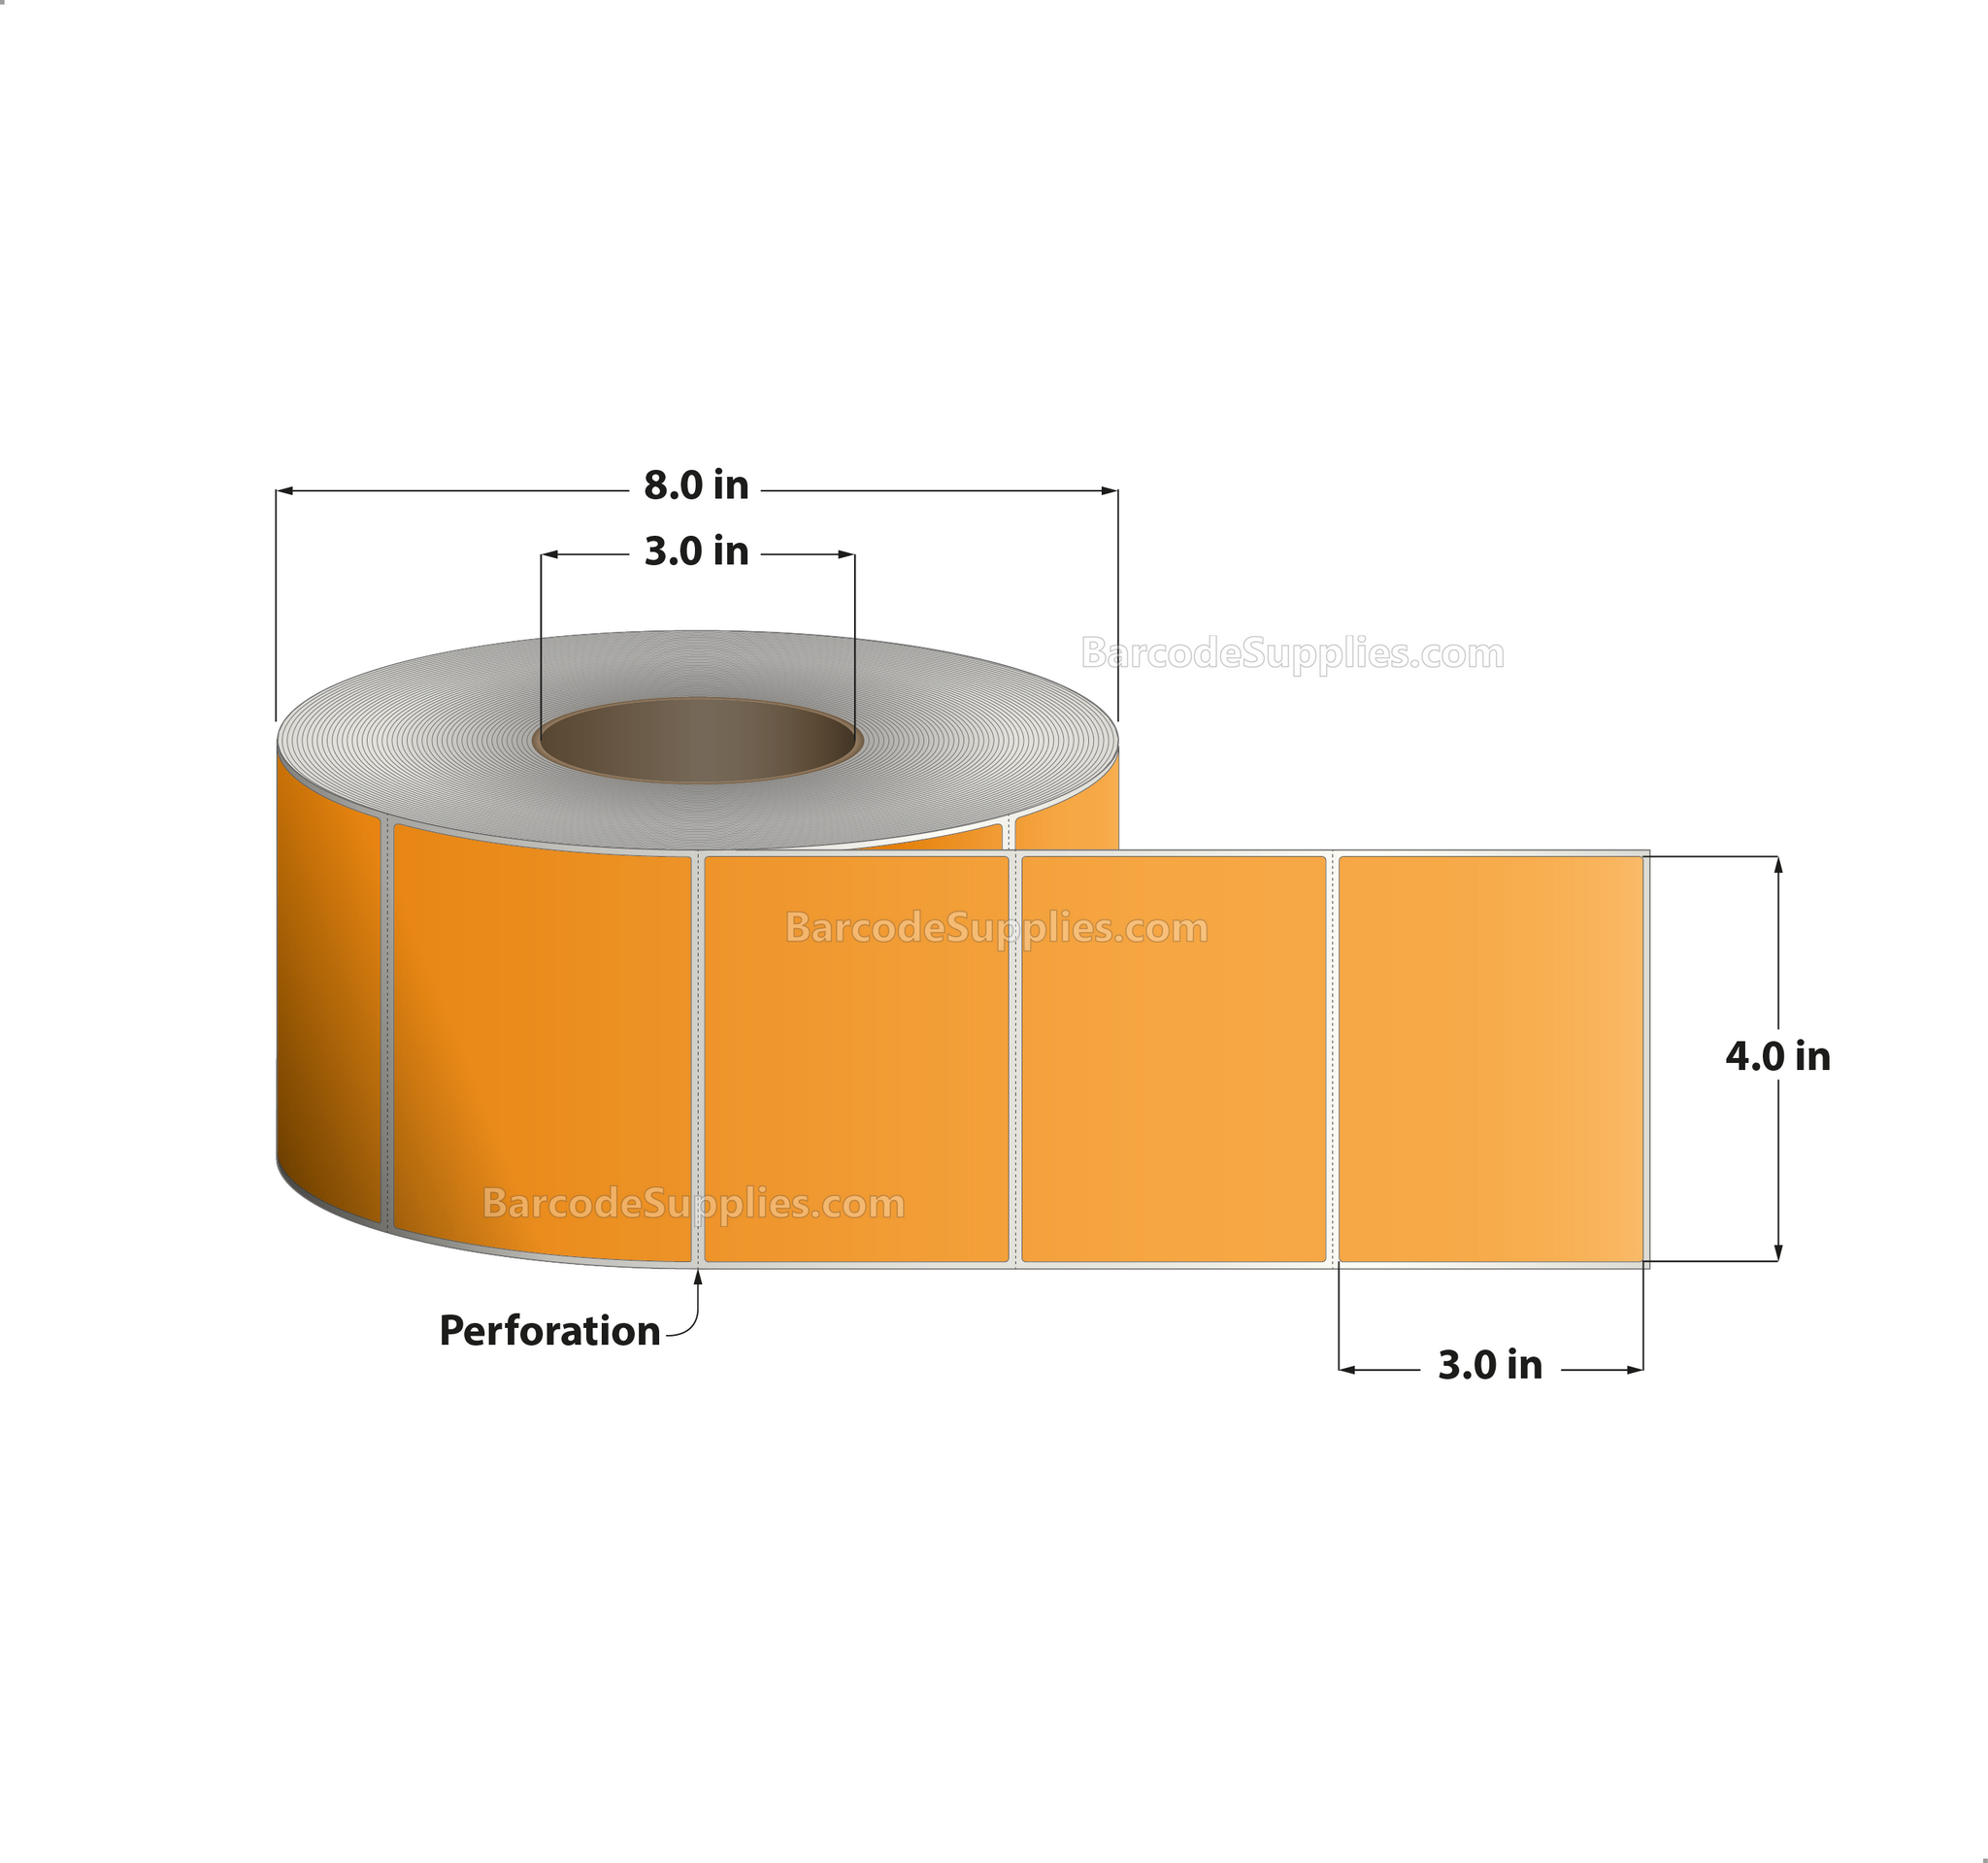 4 x 3 Thermal Transfer 136 Orange Labels With Permanent Acrylic Adhesive - Perforated - 1900 Labels Per Roll - Carton Of 4 Rolls - 7600 Labels Total - MPN: TH43-1PO